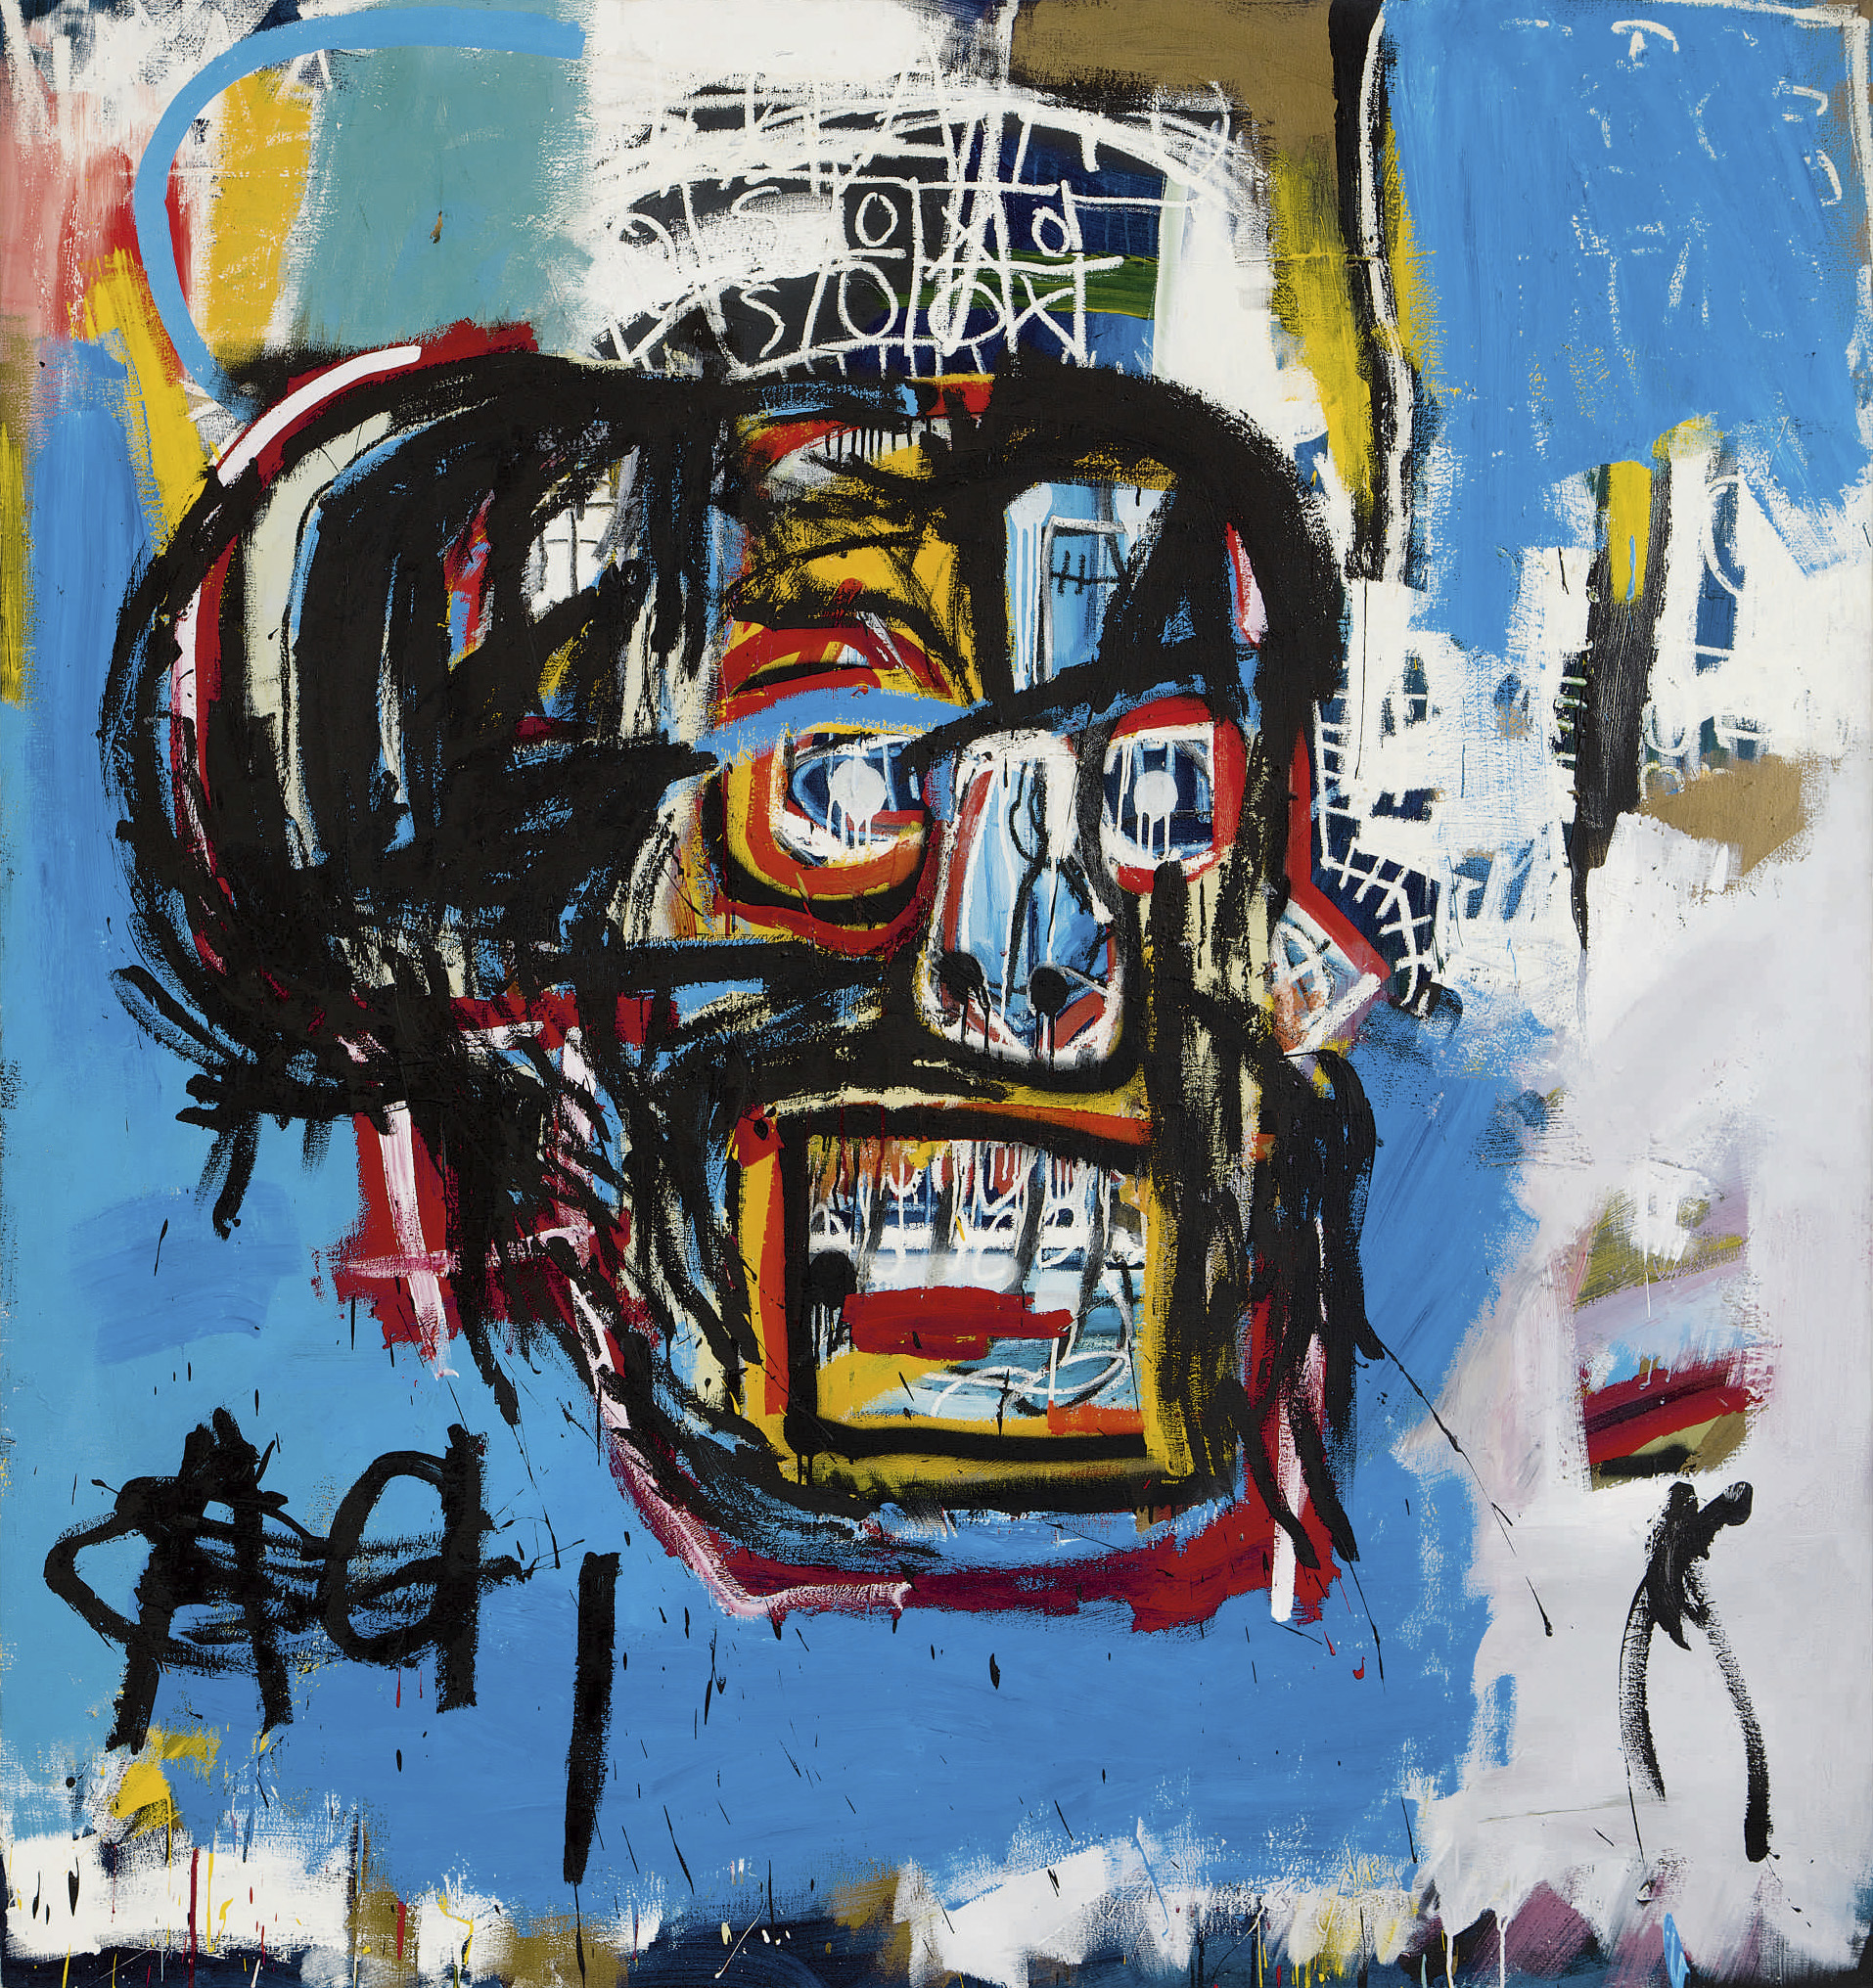 Jean-Michel Basquiat's untitled painting of a skull